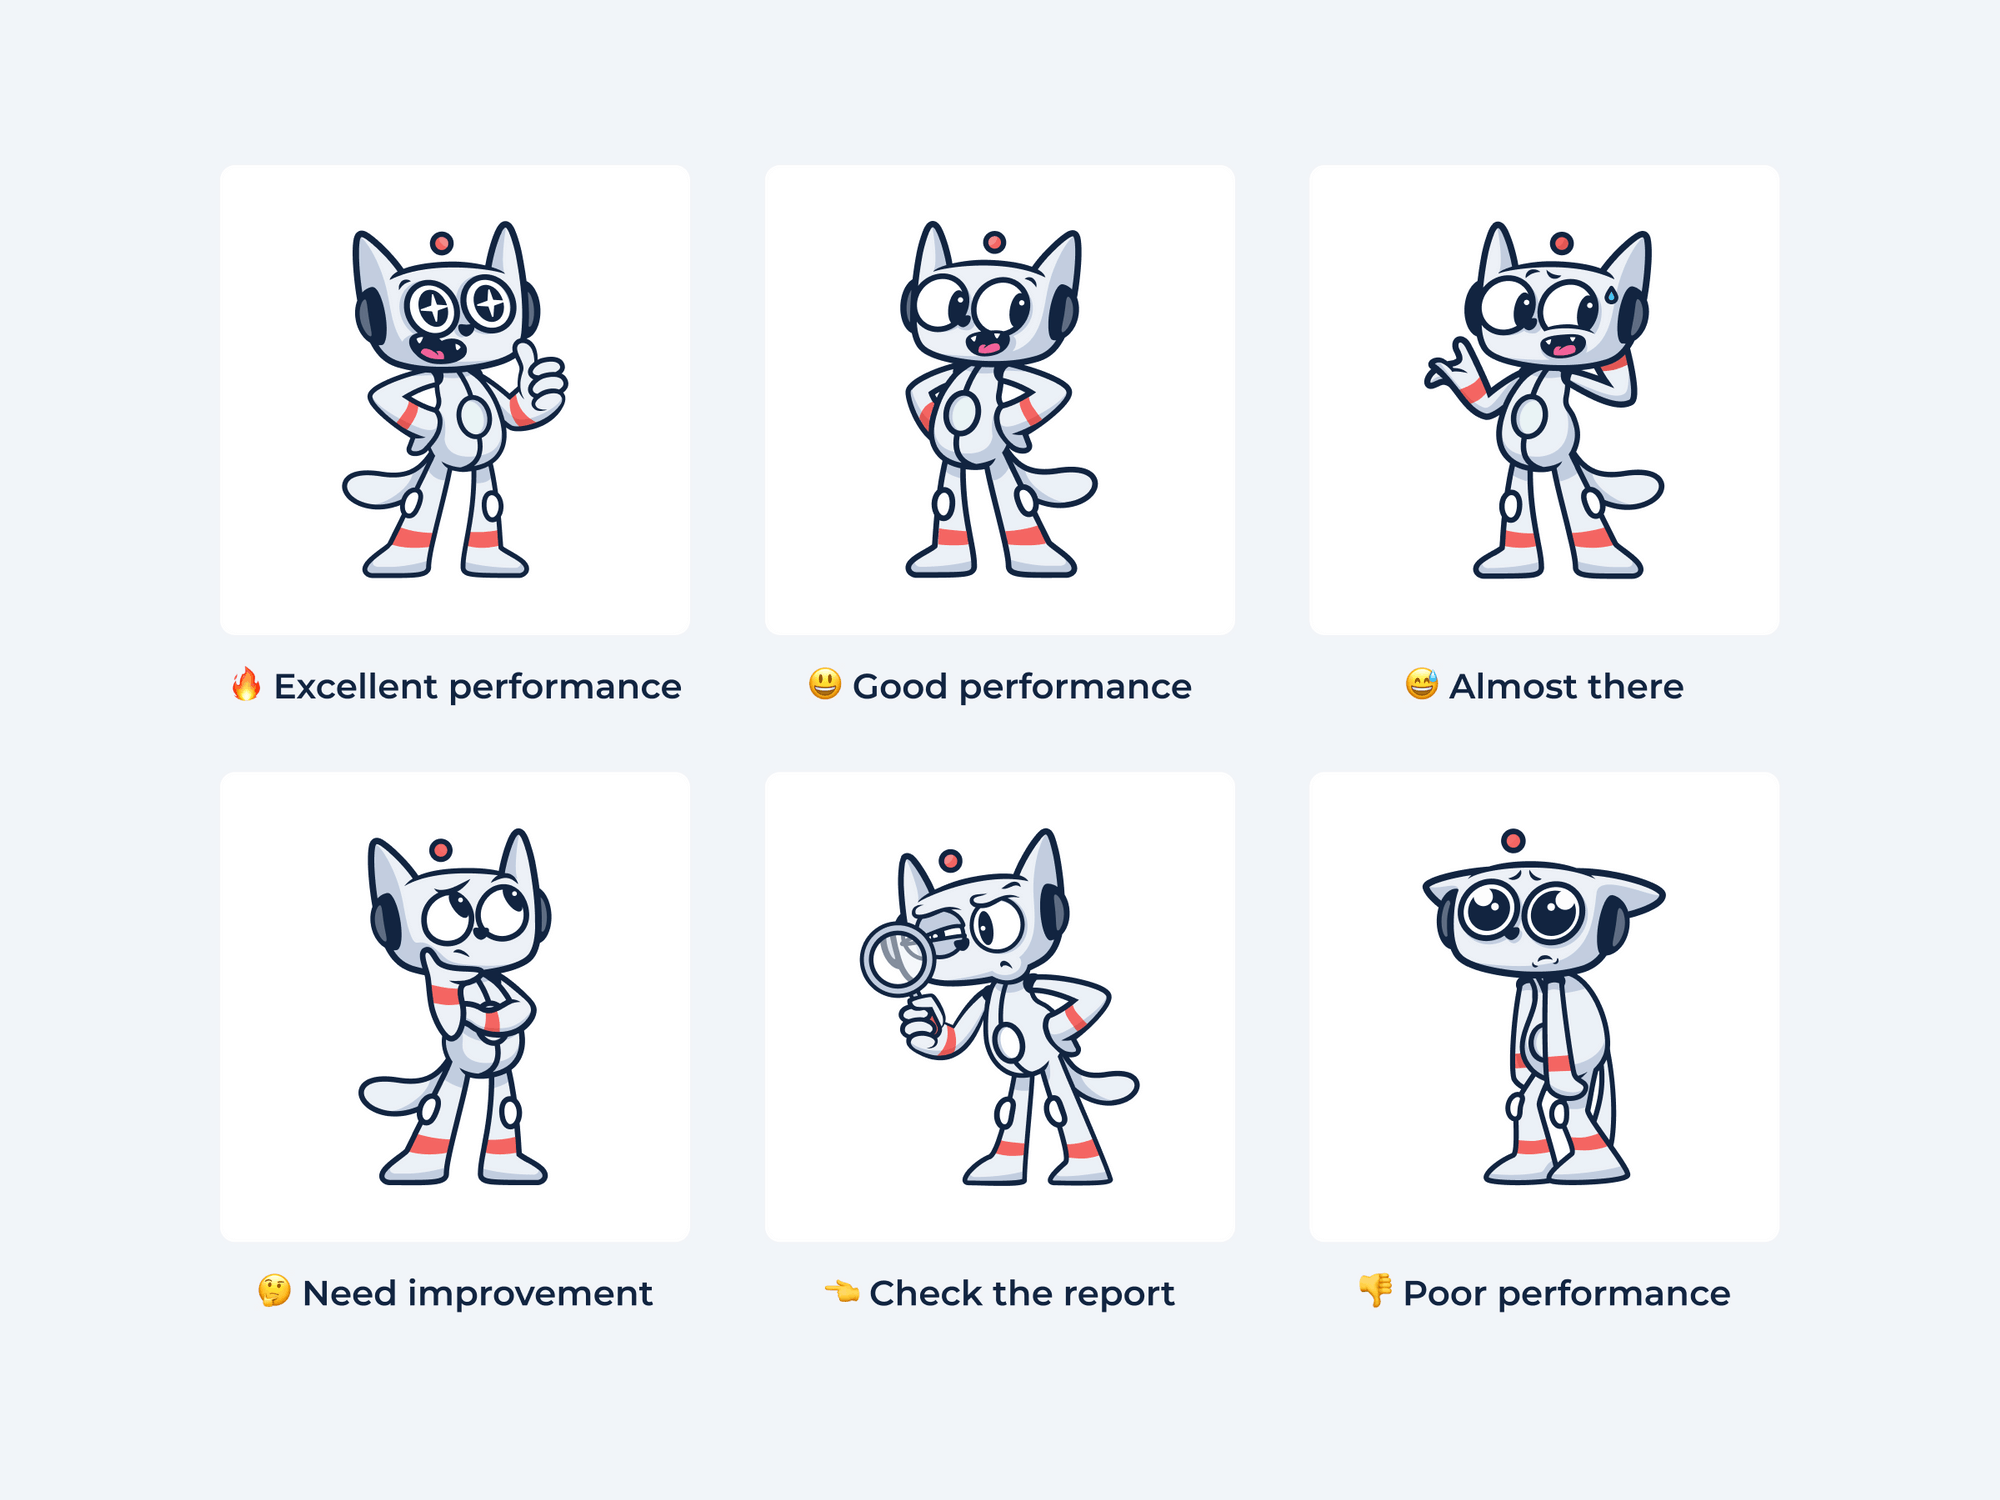 Six different poses of the PerfBuddy mascot, each representing a performance status